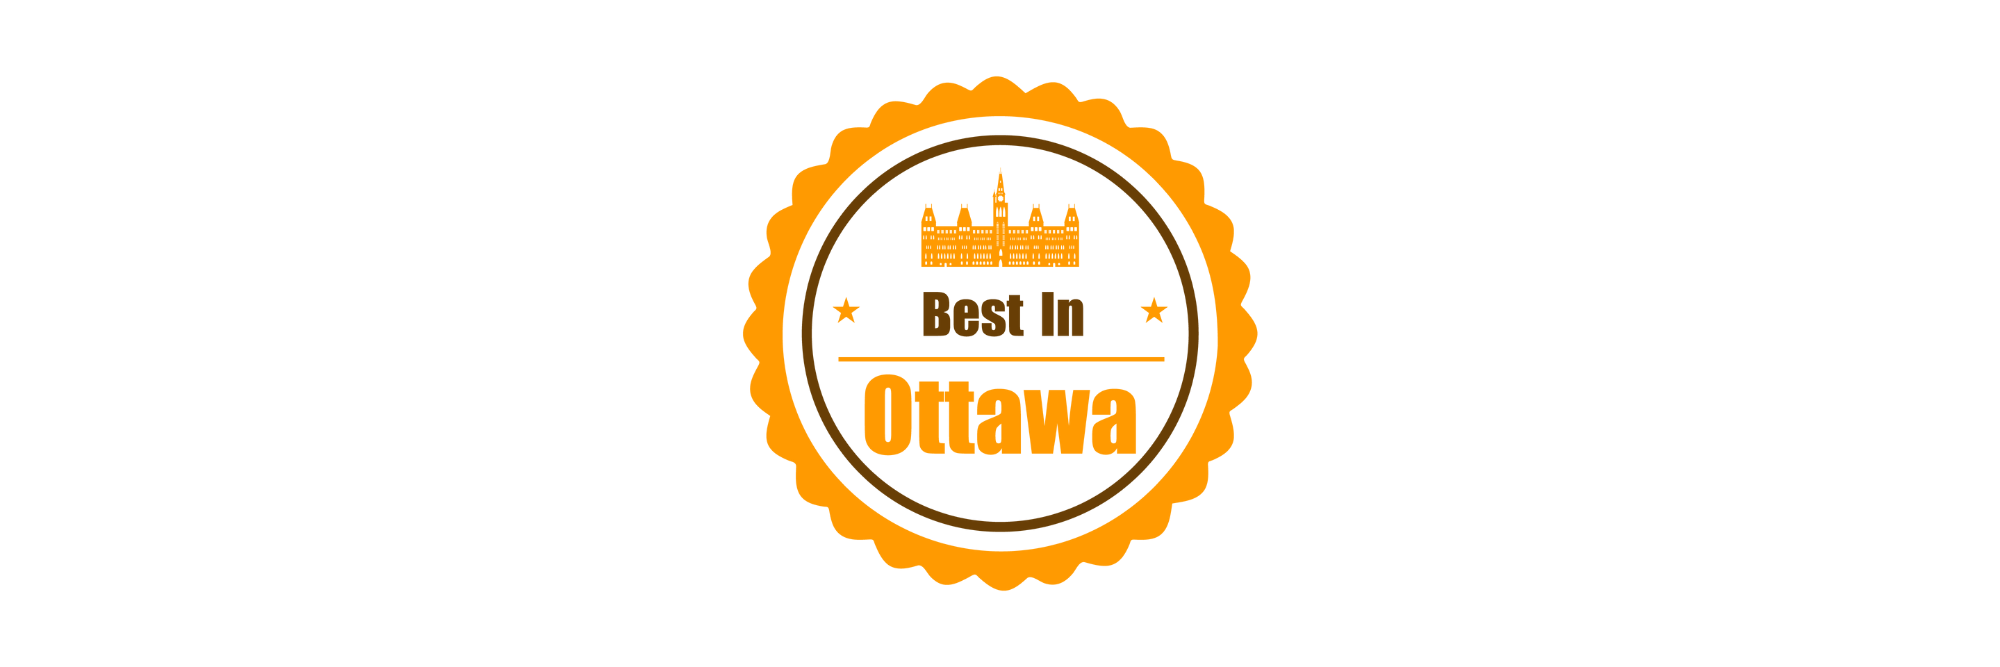 KCS Awarded Title Of One Of The Best Swimming Lessons In Ottawa!